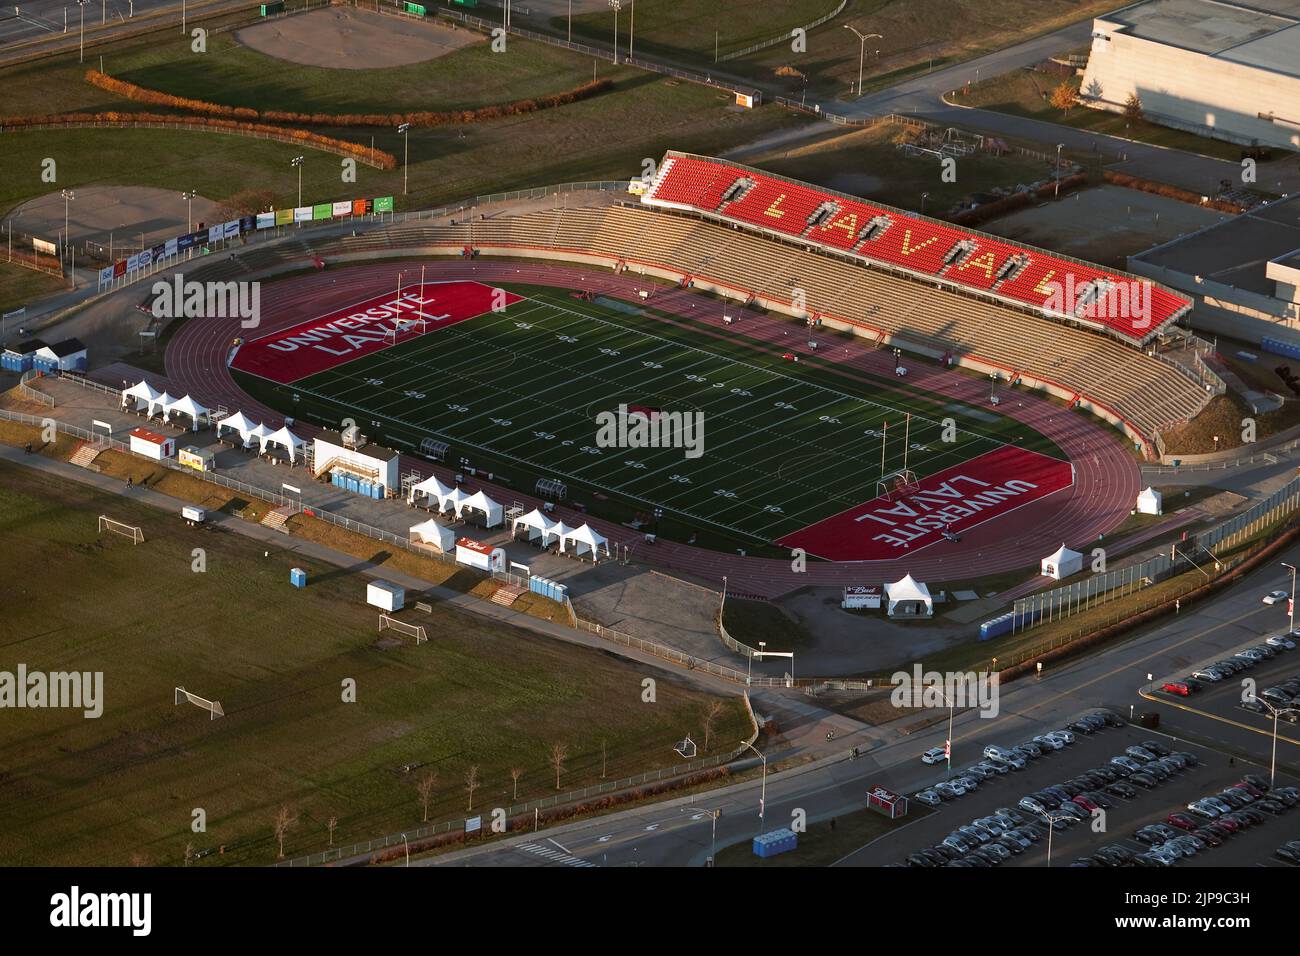 Stade du PEPS de L'universite Laval stadium in Quebec city is pictured in this aerial photo November 11, 2009. The Stade du PEPS is the home of the Rouge et Or Football team and will host the Vanier Cup for 2009 and 2010. Stock Photo